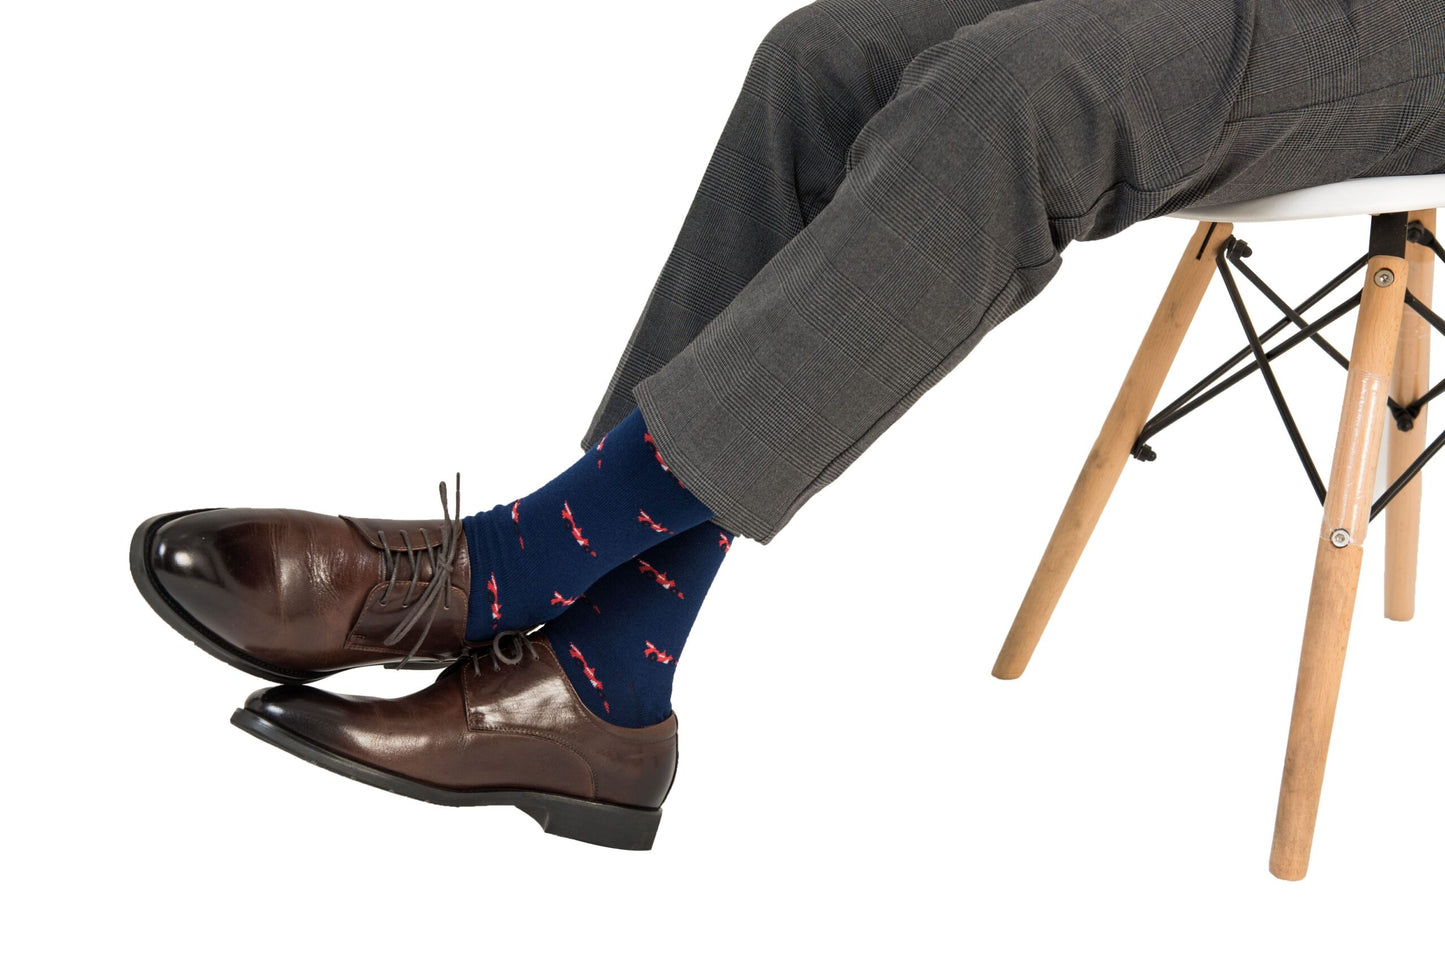 A man sitting on a chair showcasing his impressive sock game with a pair of Racing Car Socks.